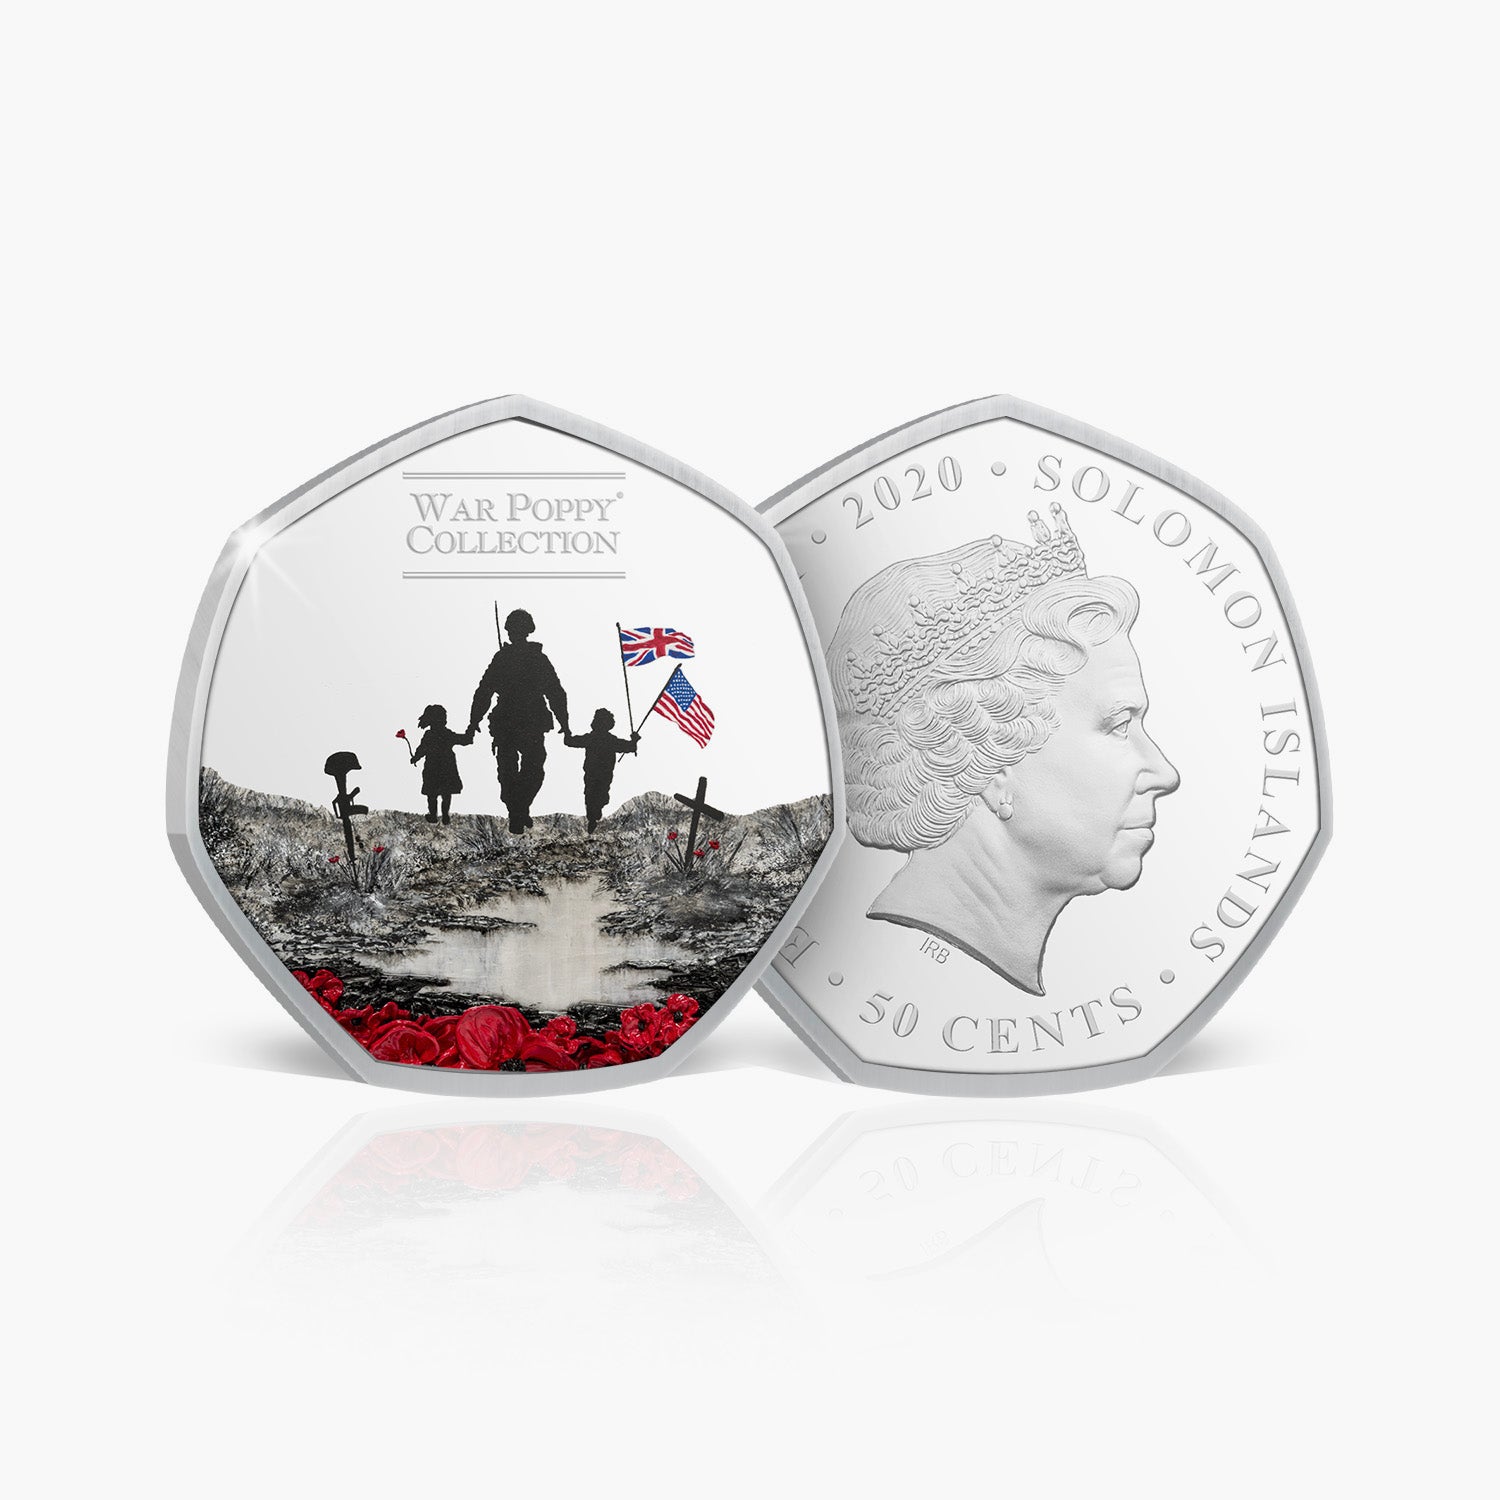 The Silver War Poppy Coin Complete Collection